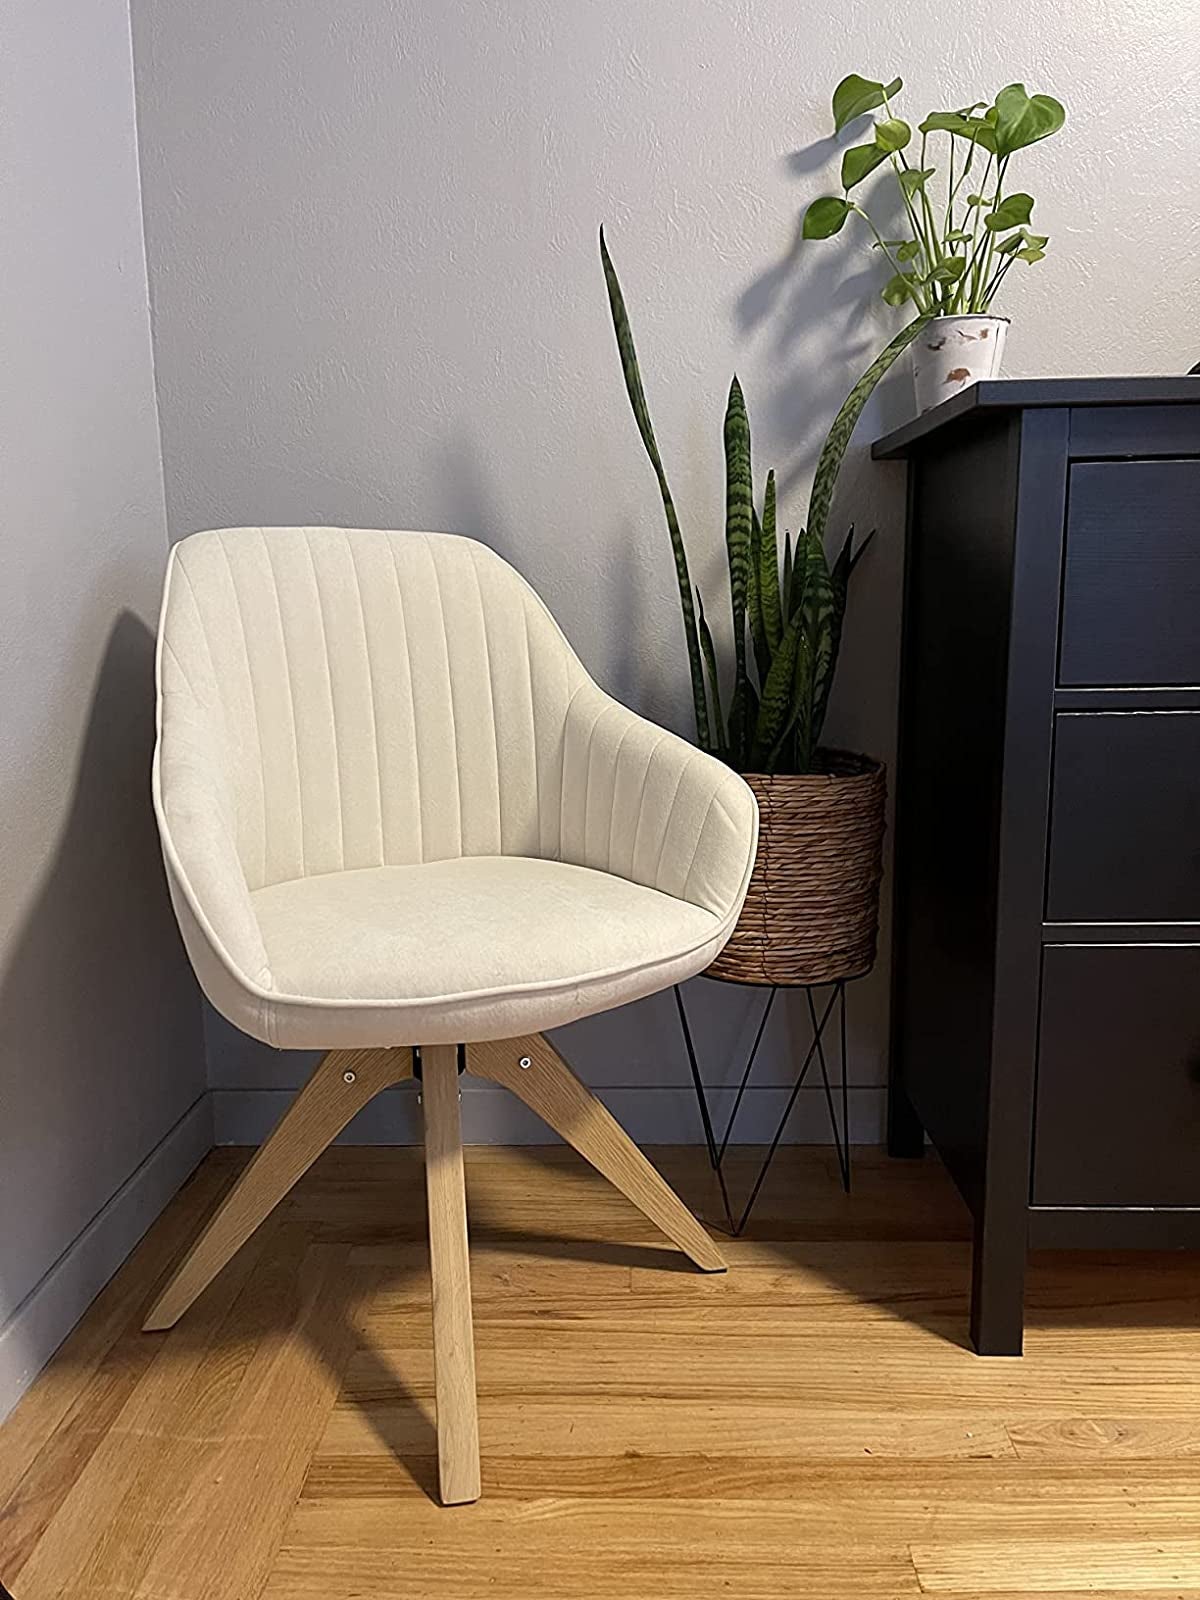 The Best Small Bedroom Chairs You Can Buy